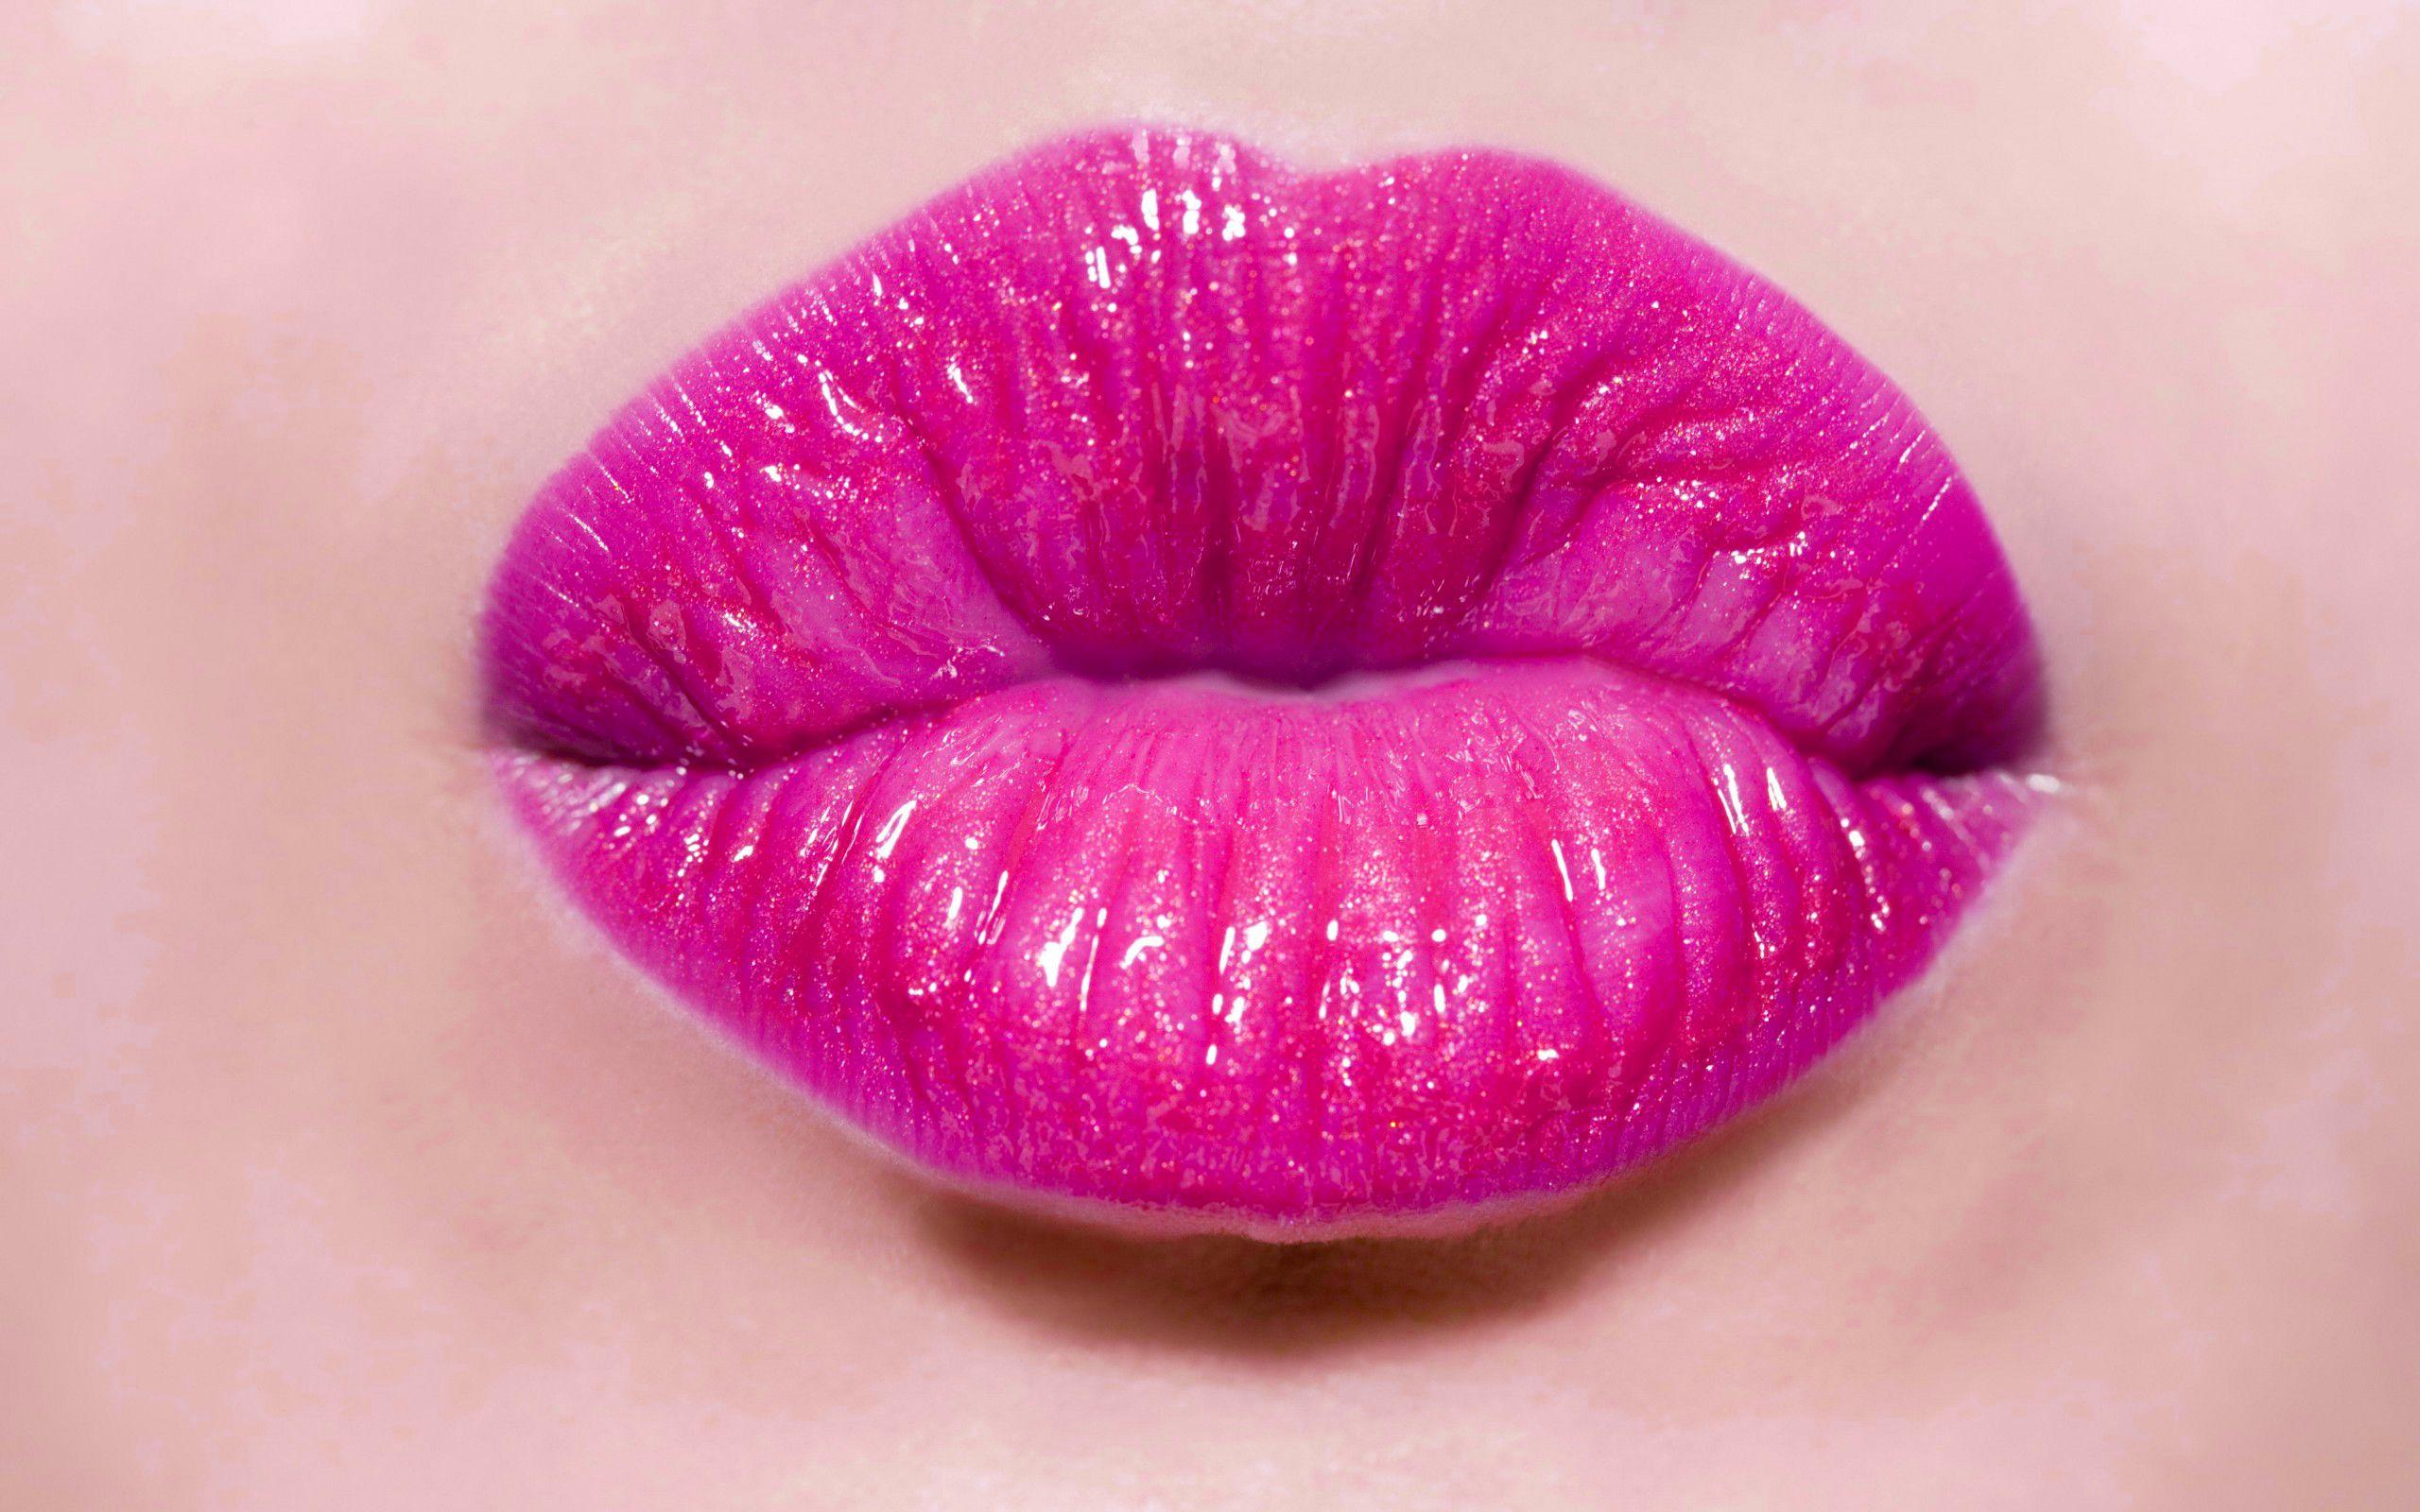 Lips Pink Wallpapers Wallpaper Cave